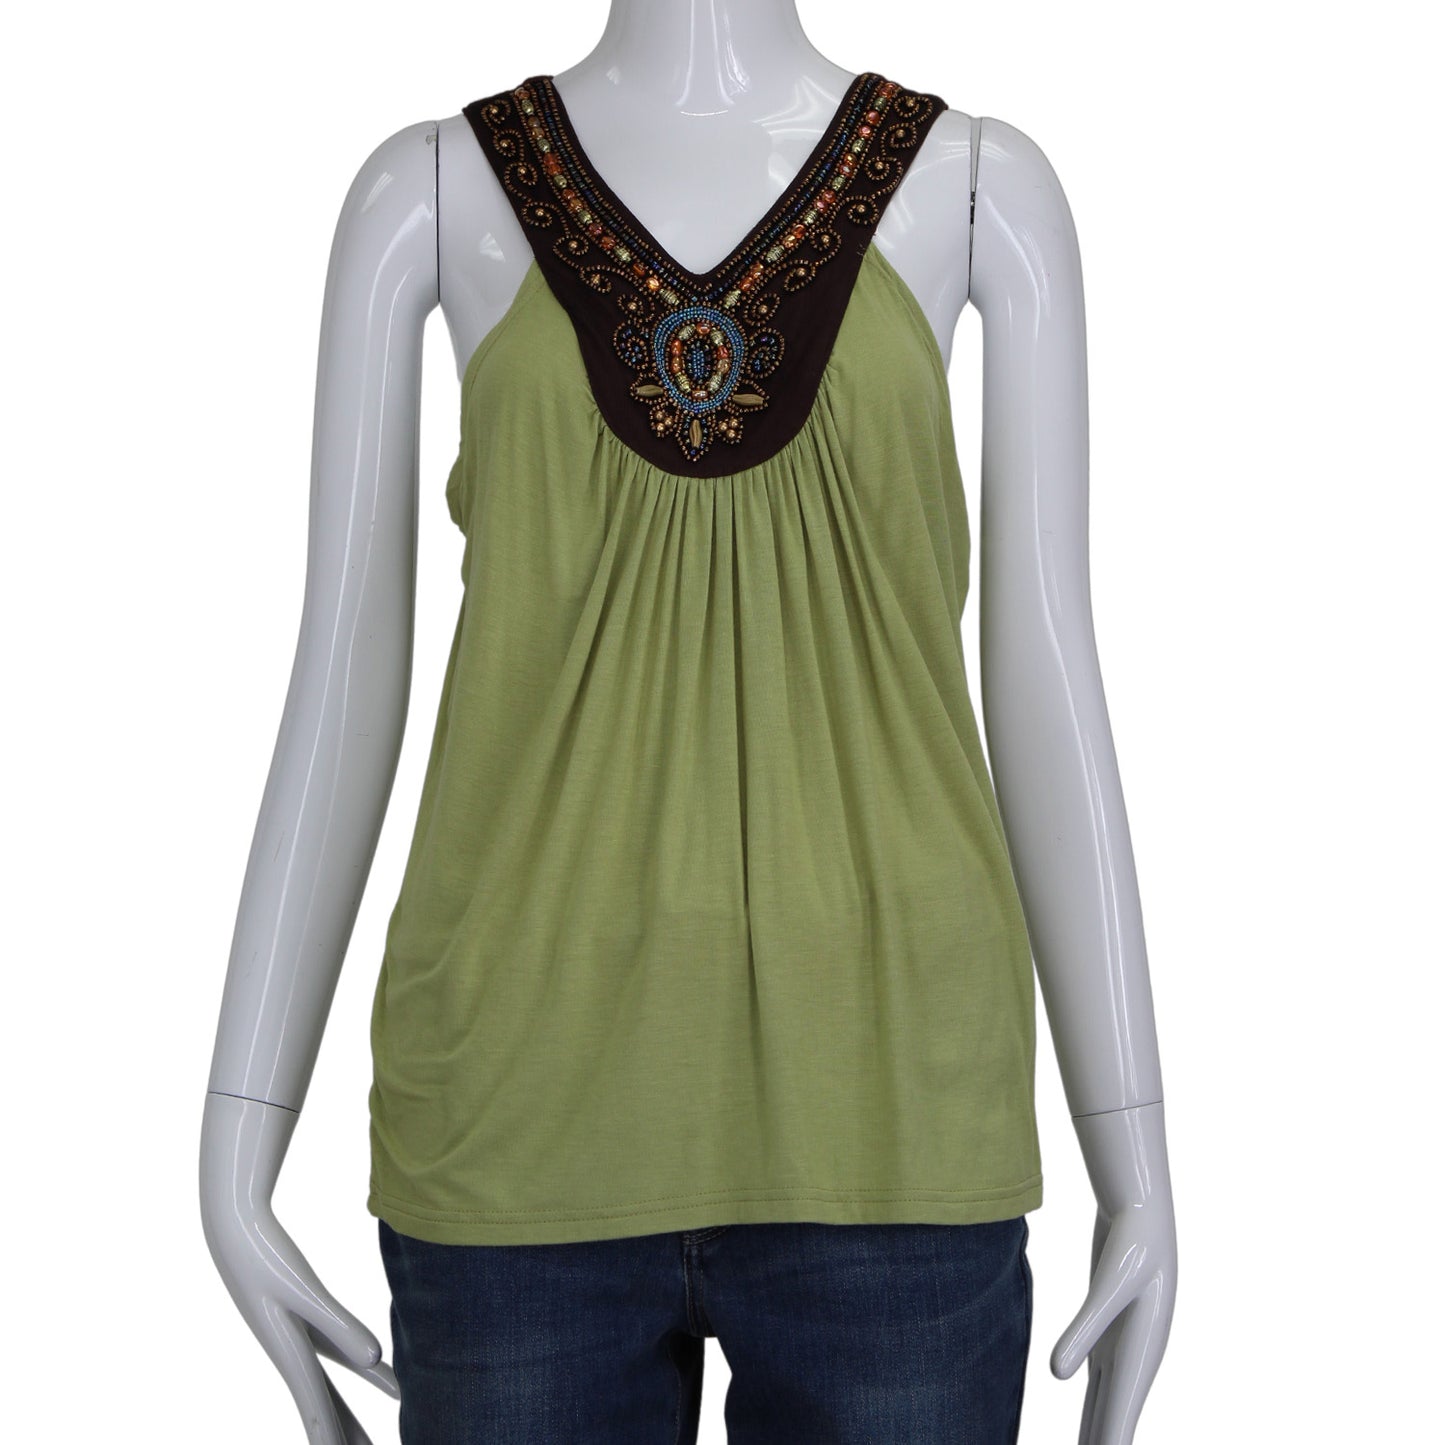 SOFT SURROUNDINGS GREEN EMBELISHED TOP SZ MD